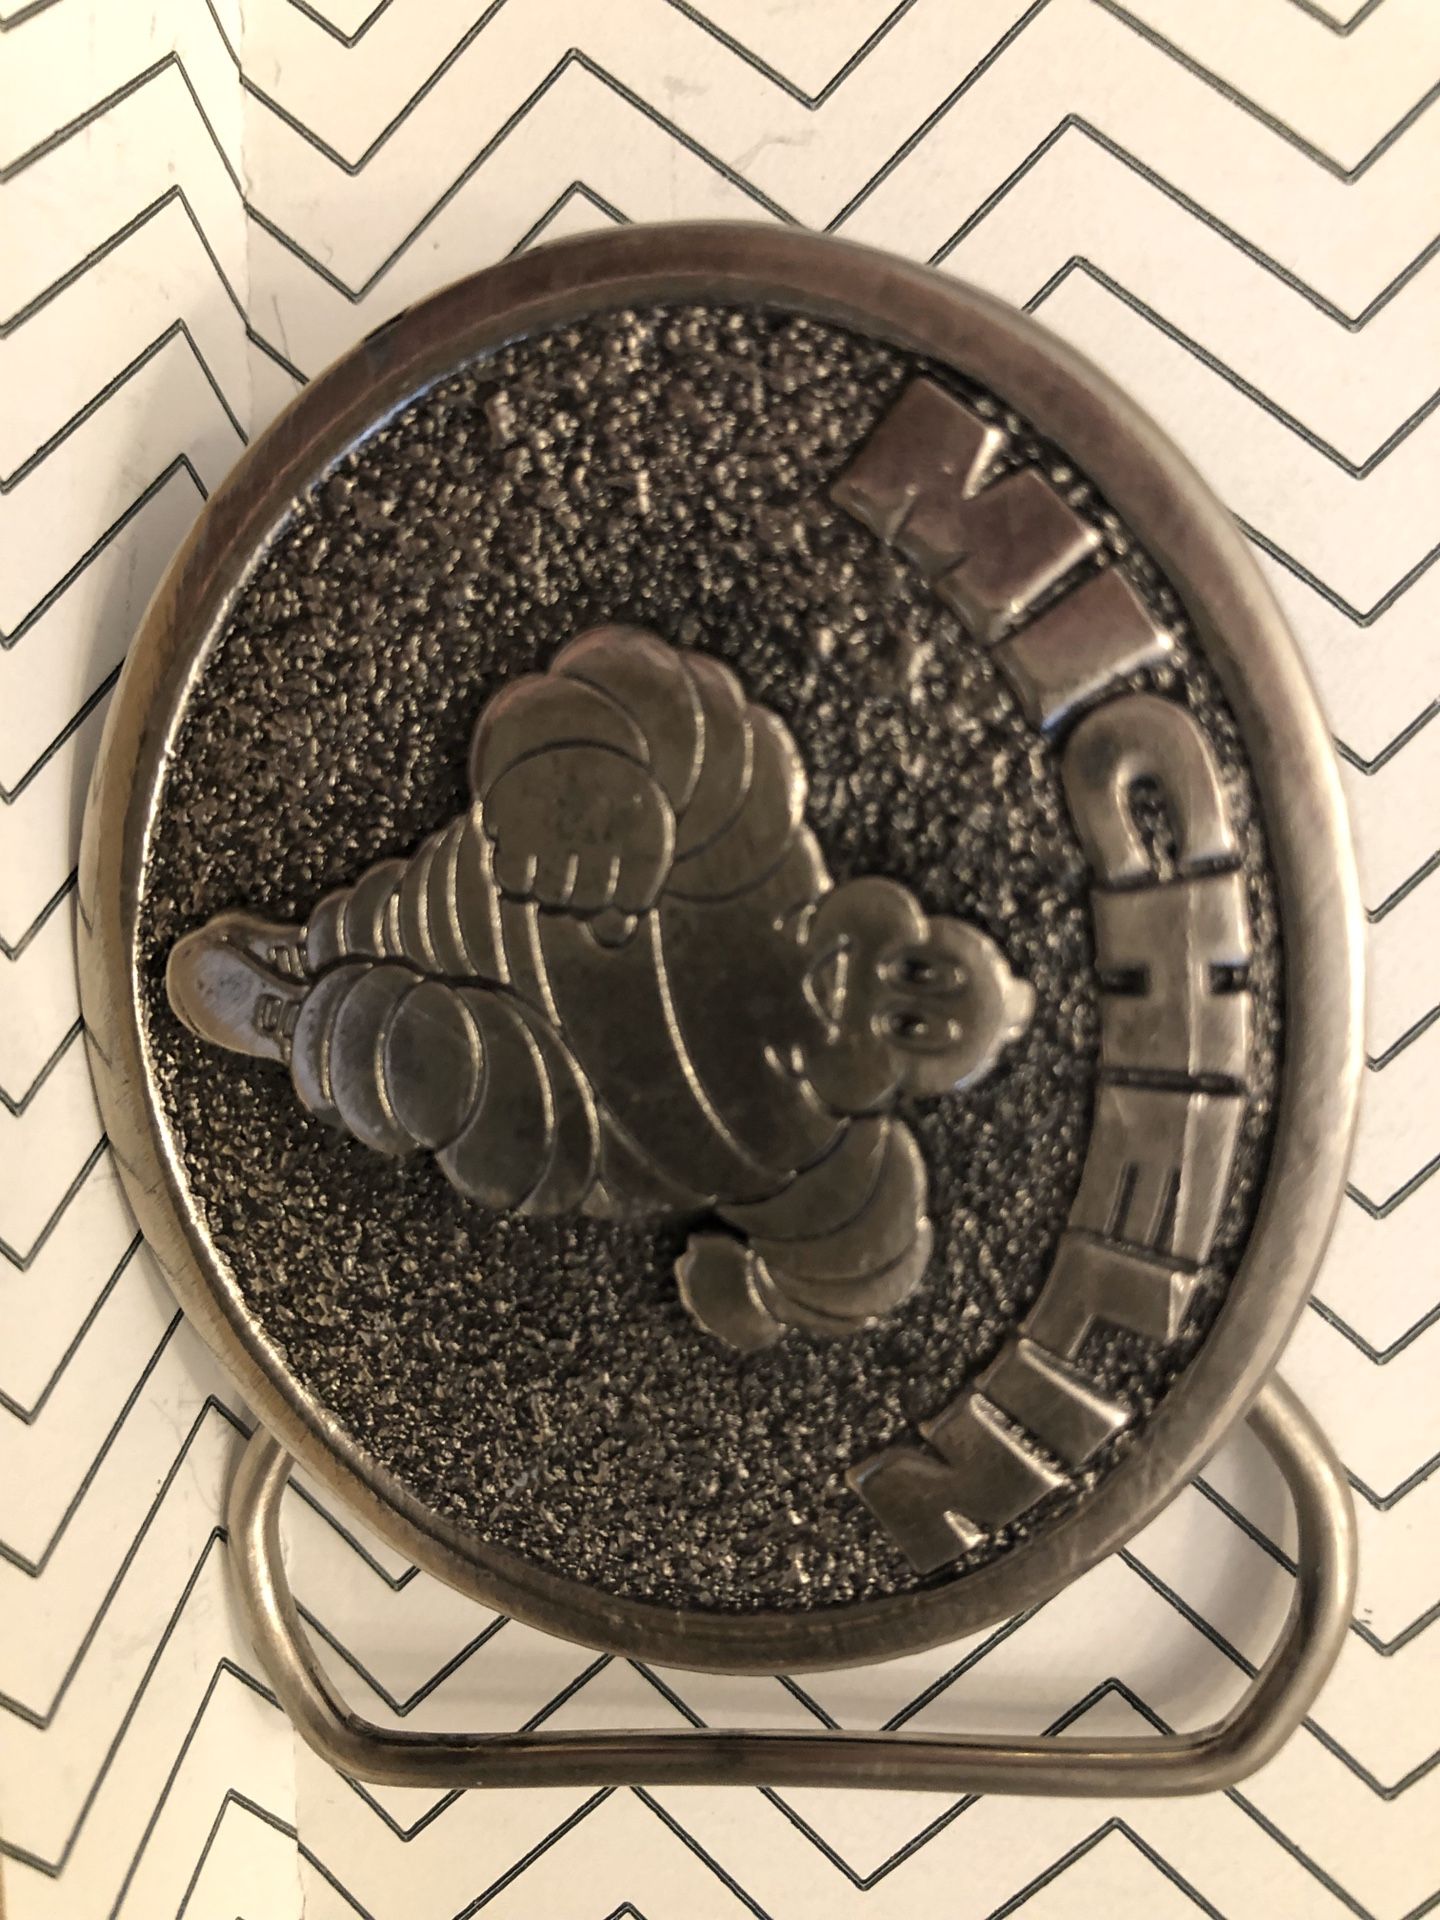 Michelin Tires Belt Buckle. Made in the USA.